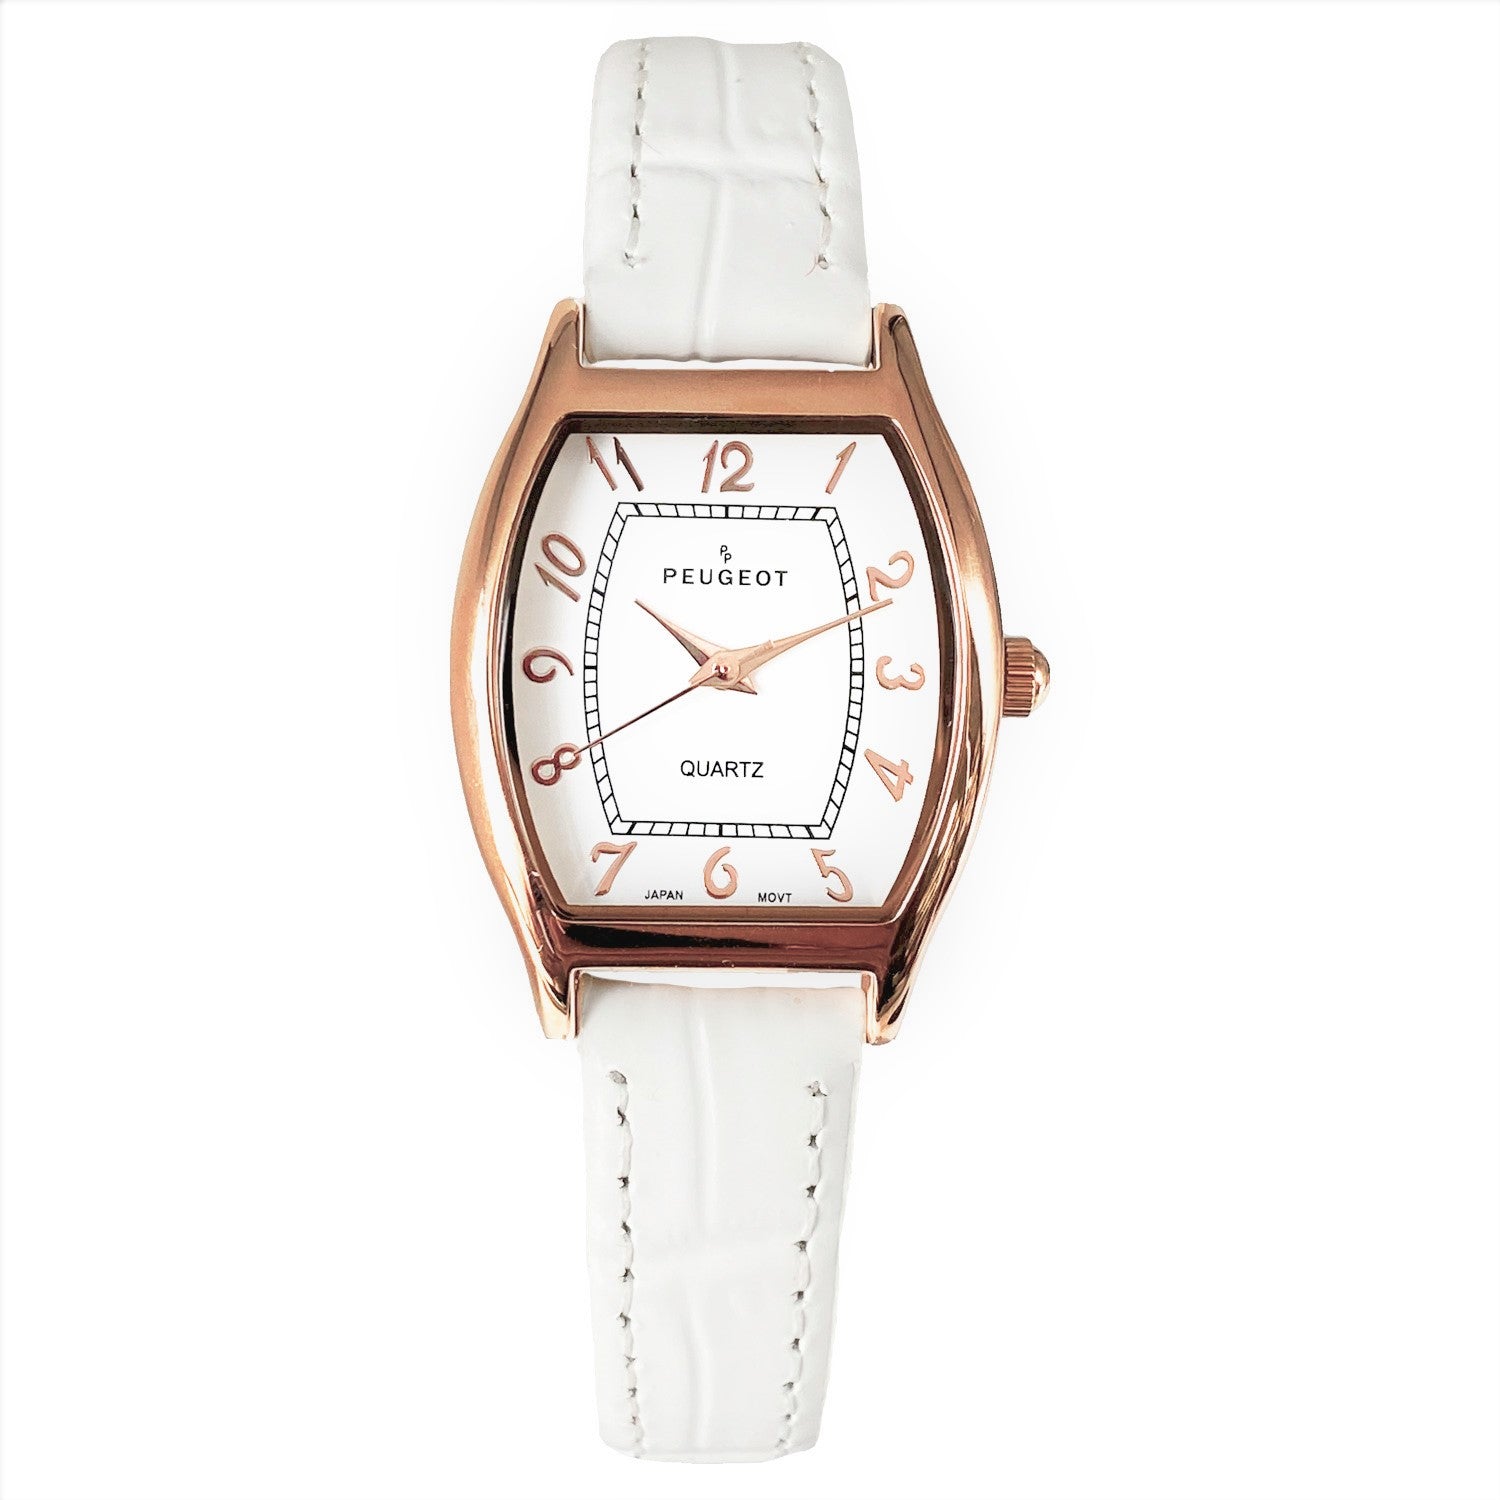 Women's Watches - Up to 40% Off - Lifetime Warranty - Peugeot Watches